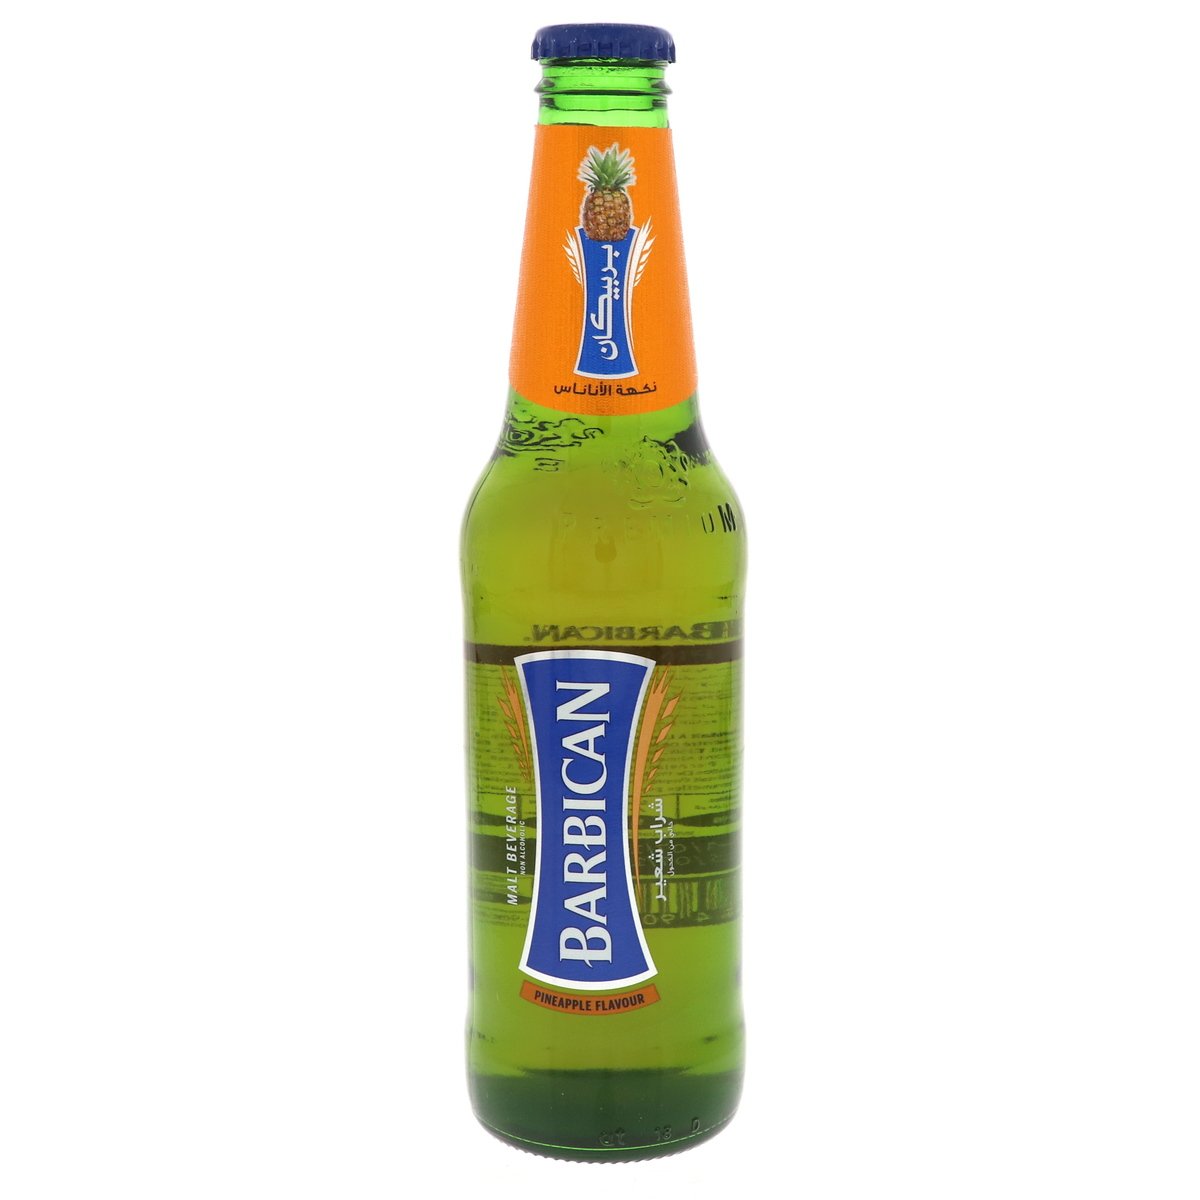 Buy Barbican Pineapple Non Alcoholic Malt Beverage 330 ml Online at Best Price | Non Alcoholic Beer | Lulu Kuwait in Kuwait